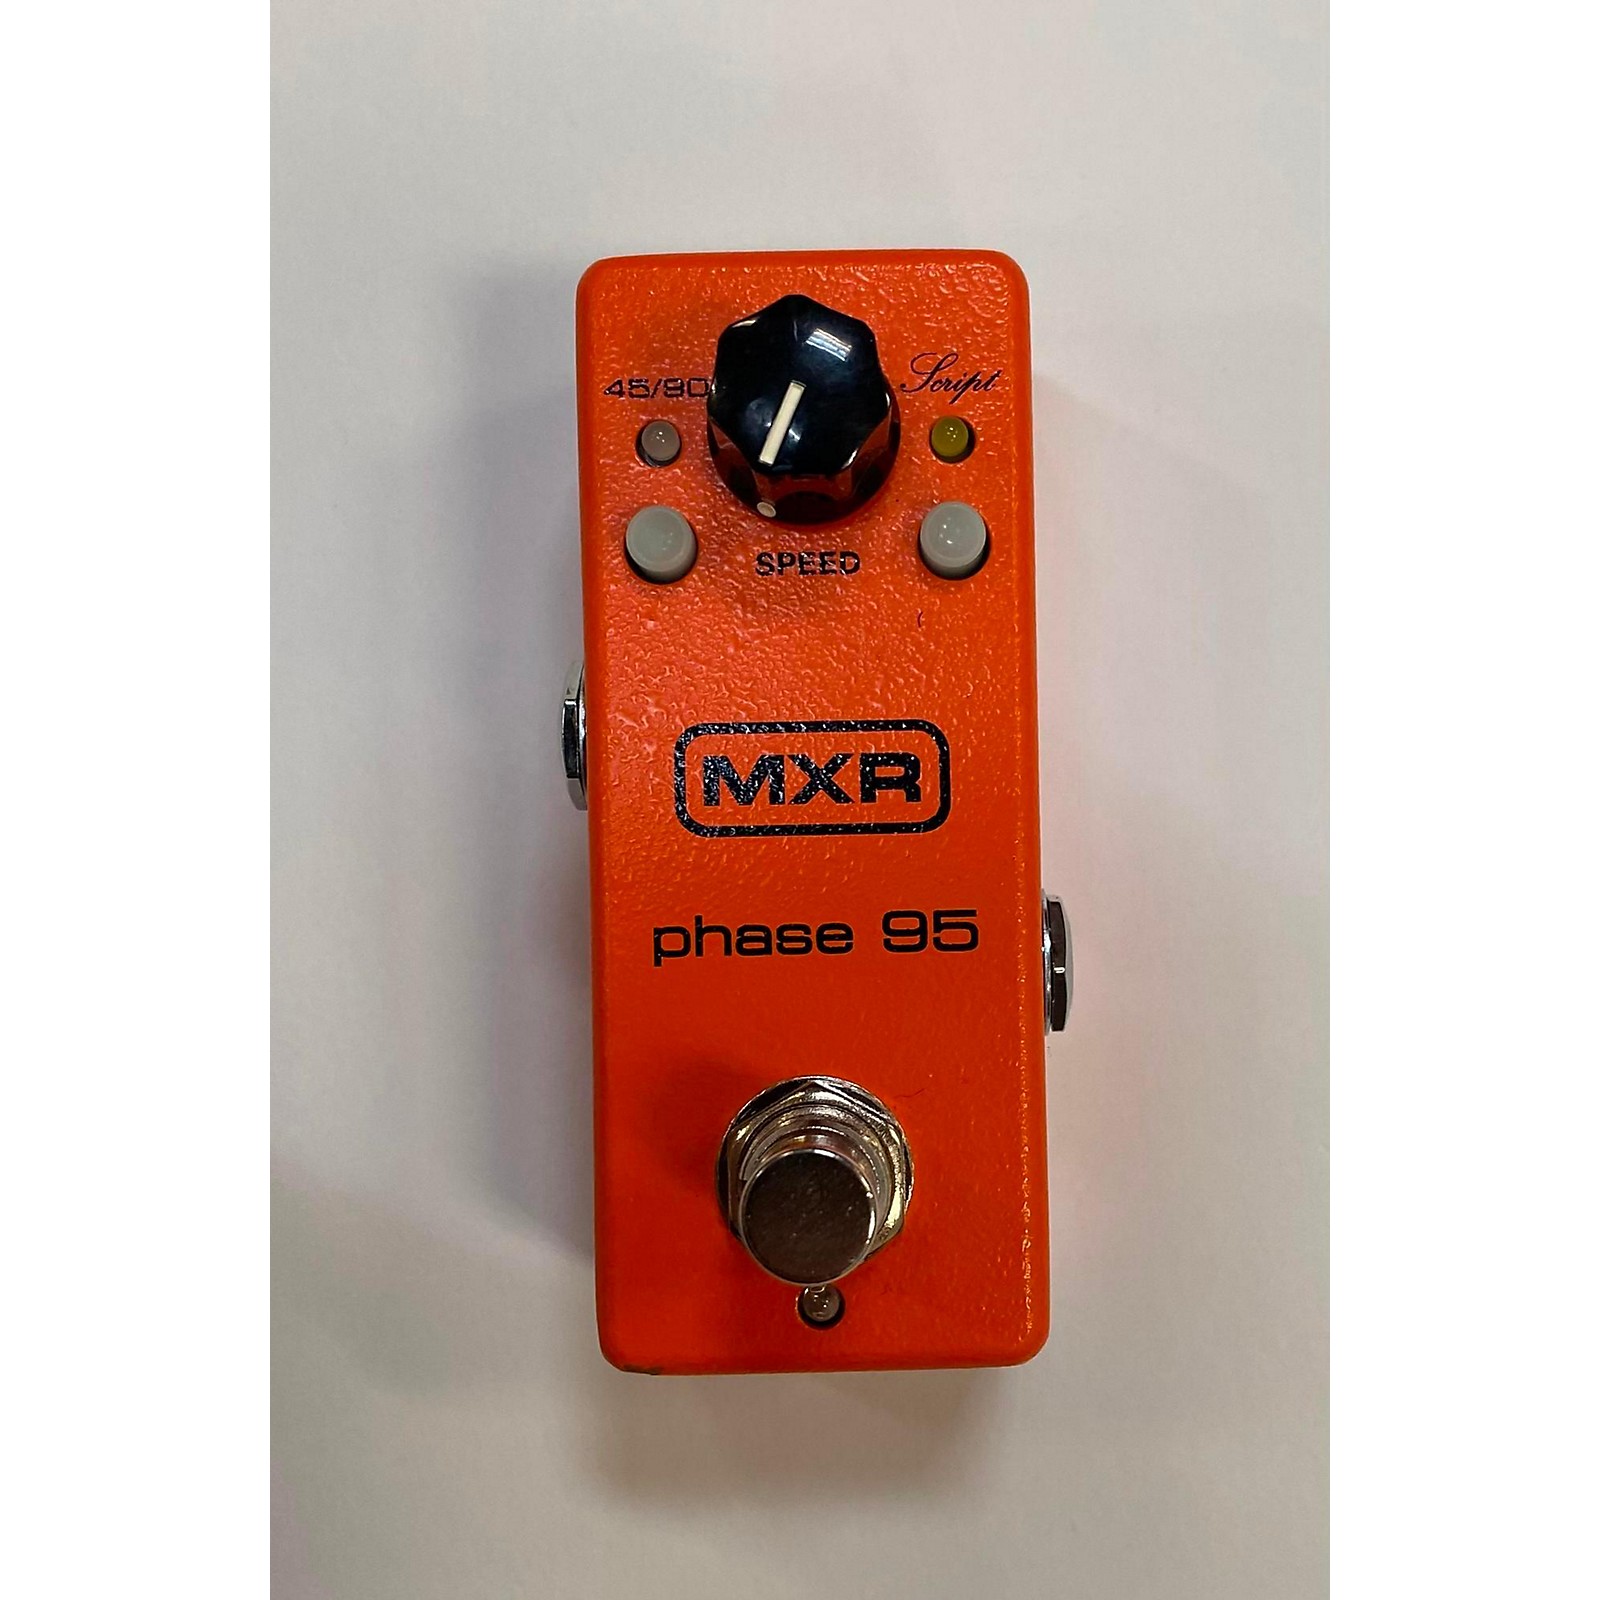 Used MXR M290 Phase 95 Effect Pedal | Guitar Center